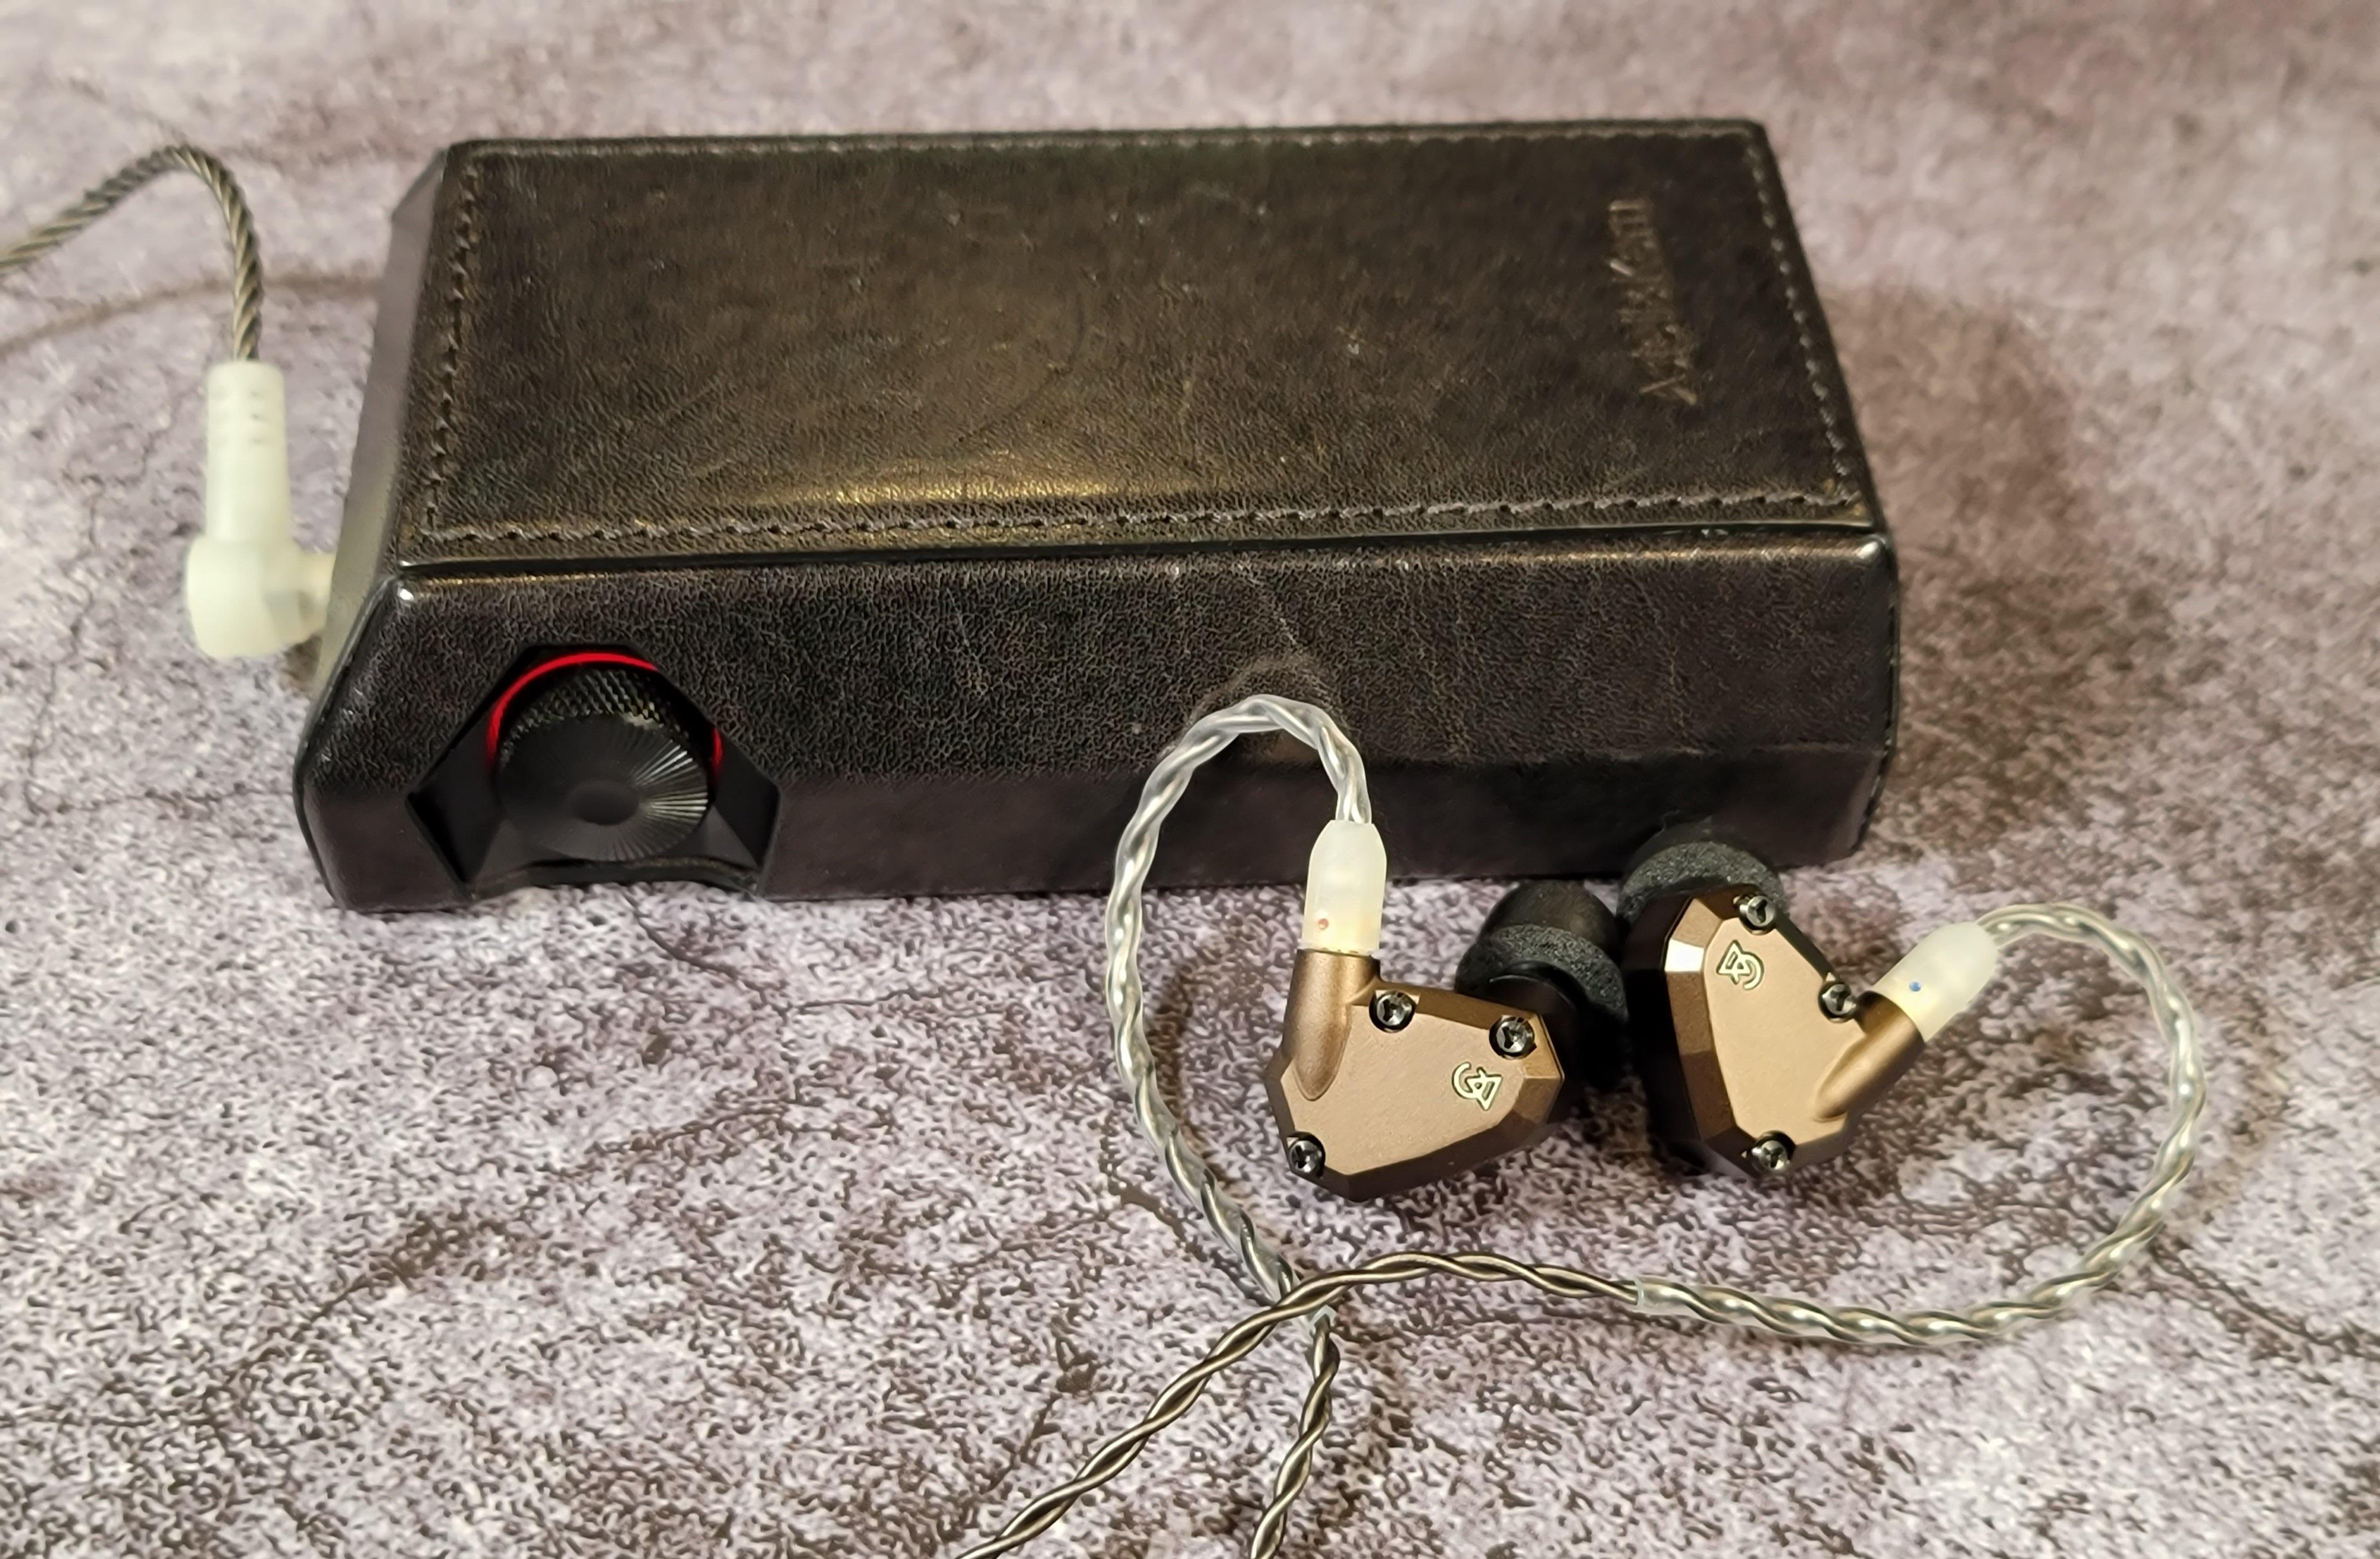 Sub $1000 Technical Contender? Campfire Audio Holocene Review